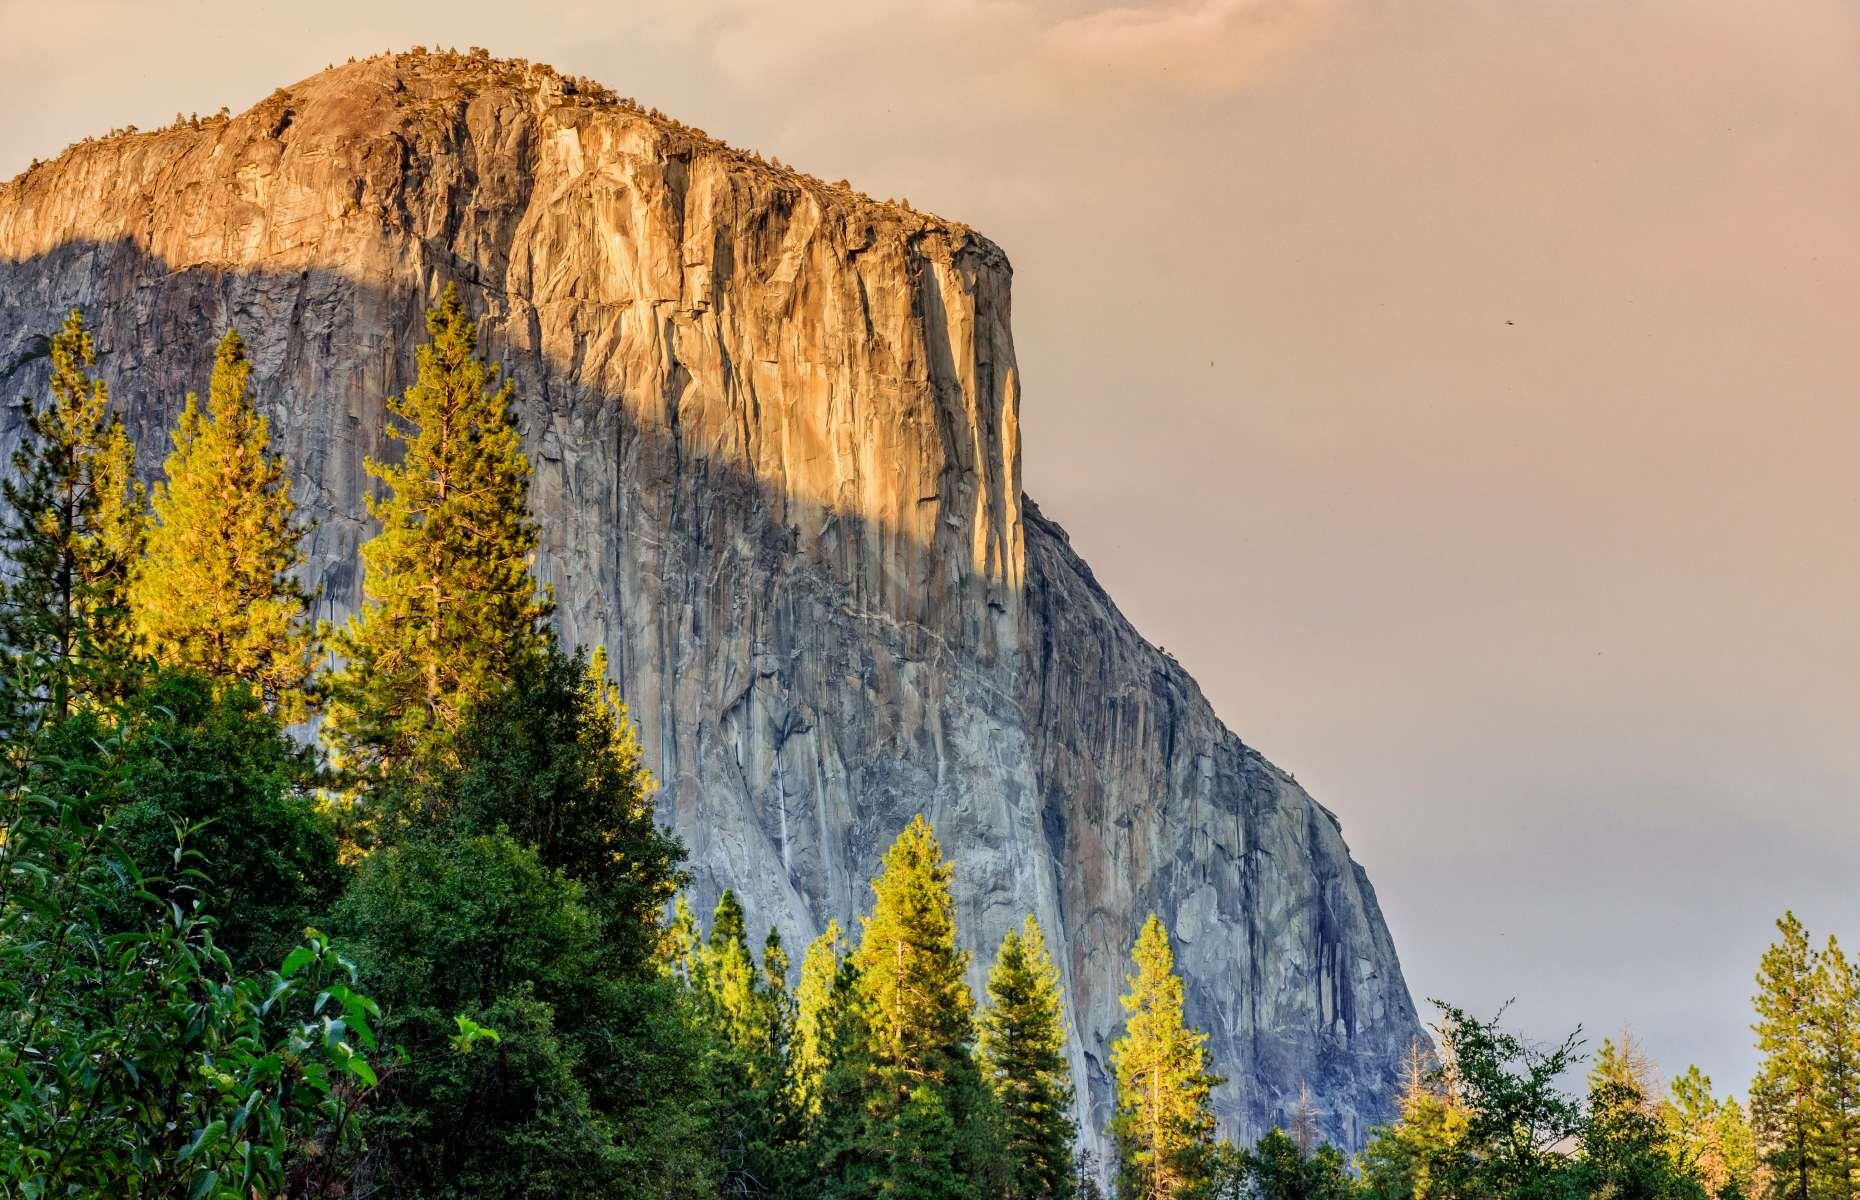 <p>El Capitan (pictured) is the literal rock star of Yosemite. Standing at more than 3,000 feet tall, this hulking granite monolith rises to more than twice the height of the Empire State Building. Another of the park’s most striking geological landmarks is Half Dome, nearly 5,000 feet above the valley floor, which can, like El Capitan, be climbed for unreal views over the majestic landscape. To get Half Dome in the frame of your photo head to Glacier Point for the best perspective. Tunnel View, perhaps the most photographed view in the national park, features El Capitan, Bridalveil Fall and Half Dome in the distance.</p>